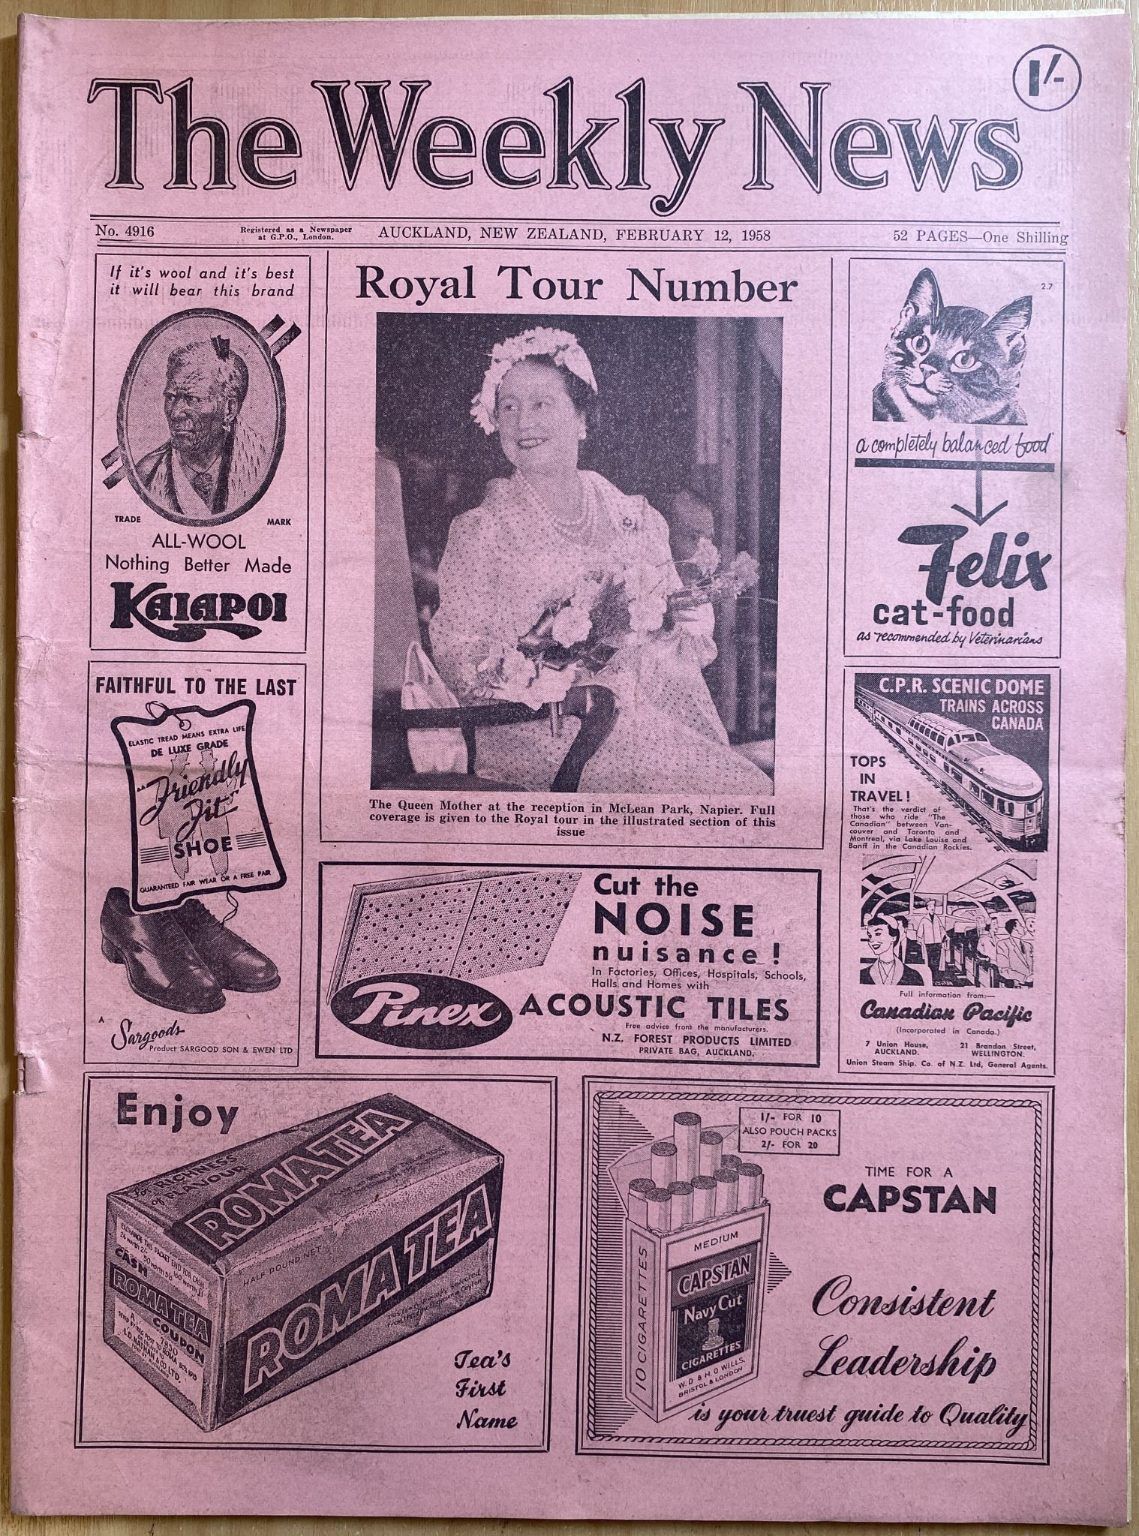 OLD NEWSPAPER: The Weekly News, No. 4916, 12 February 1958